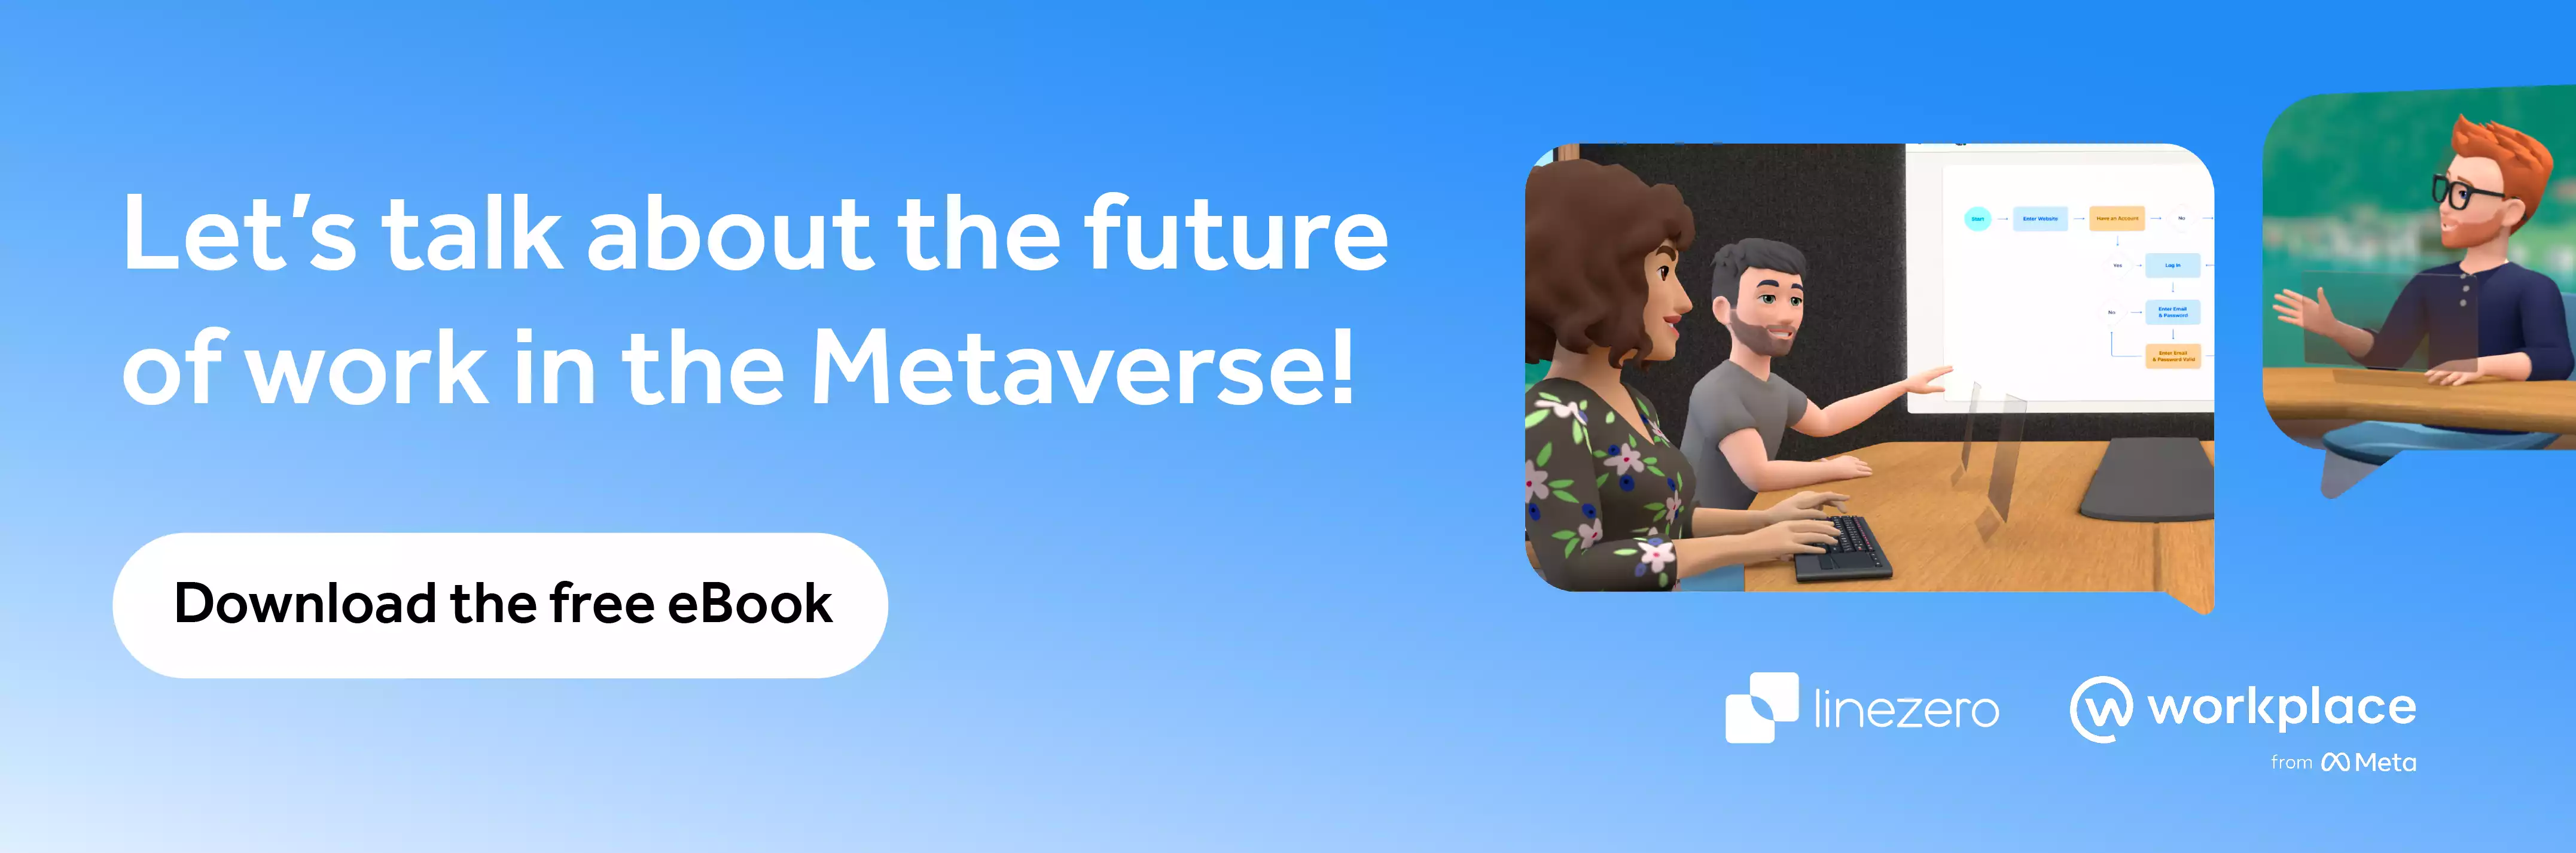 Future of Work in the Metaverse download free ebook